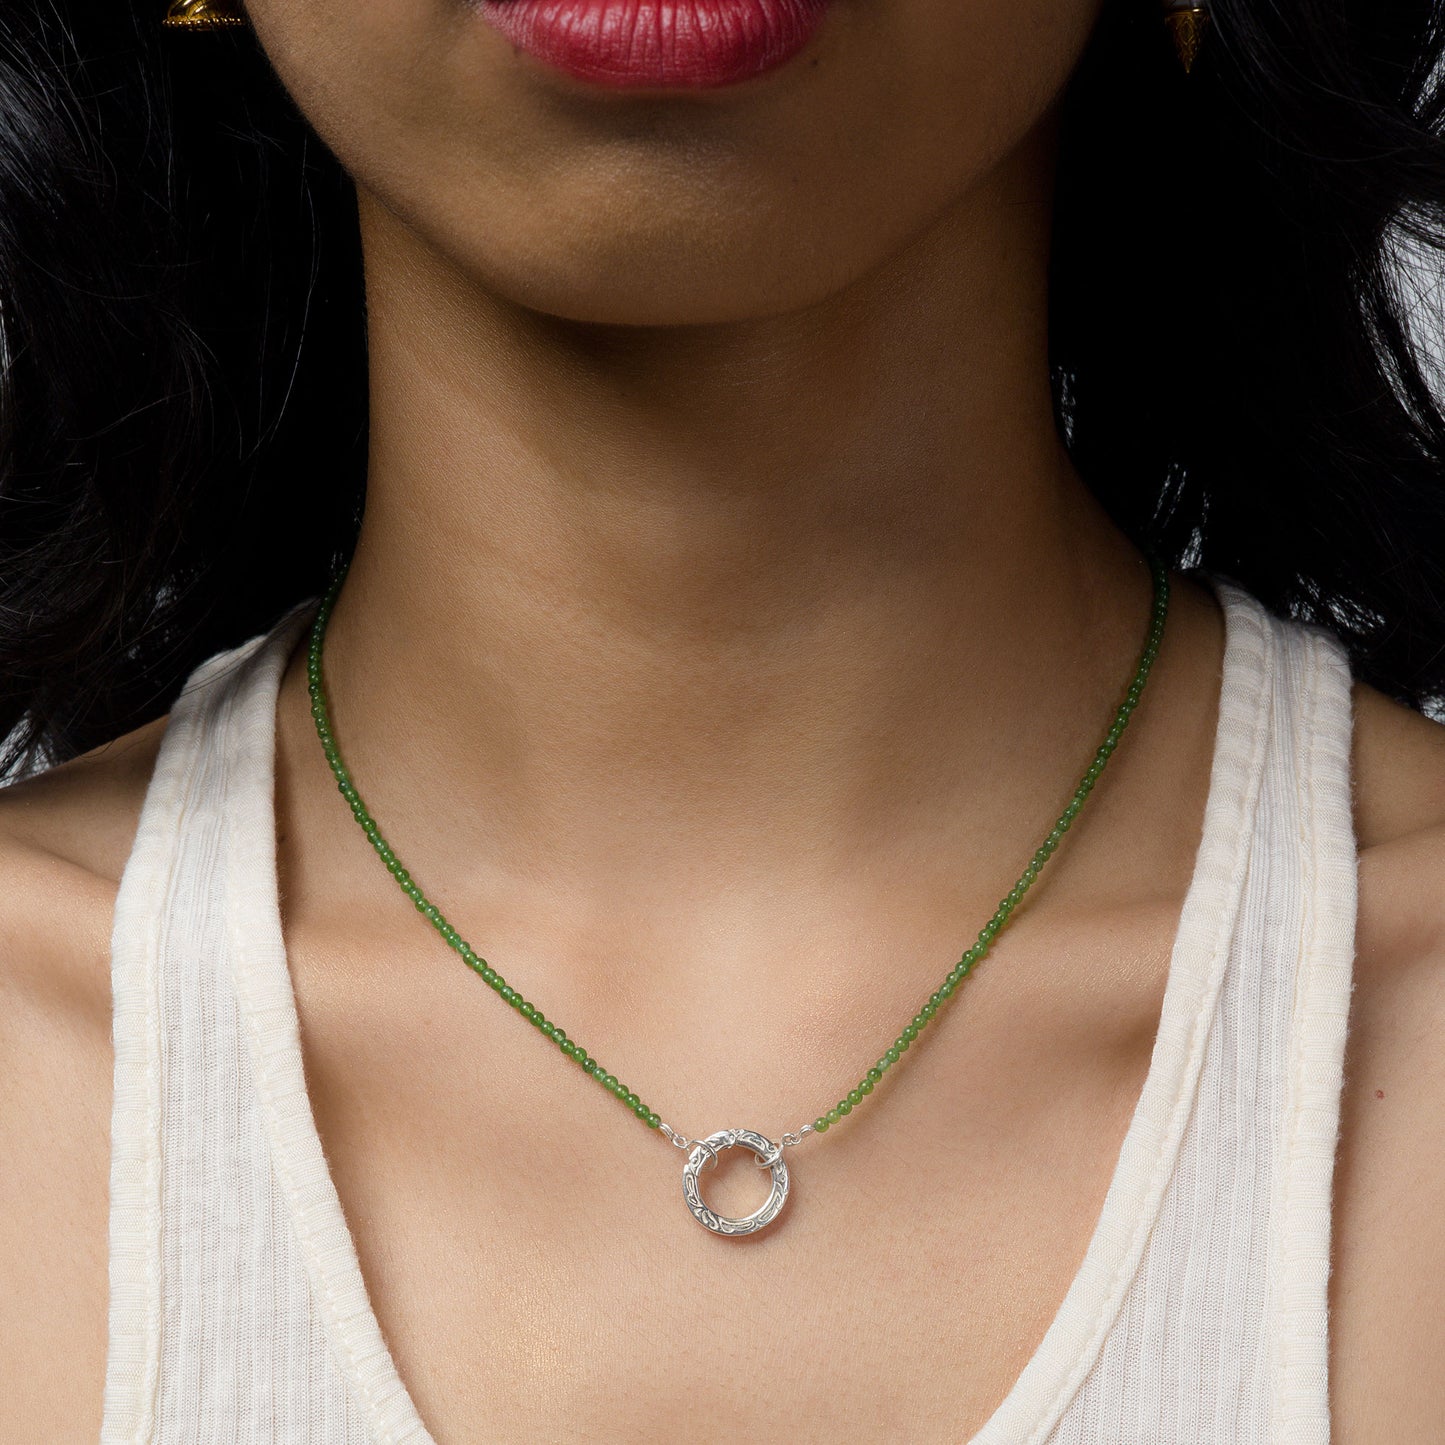 Chantilly Charm Holder on Jade Necklace